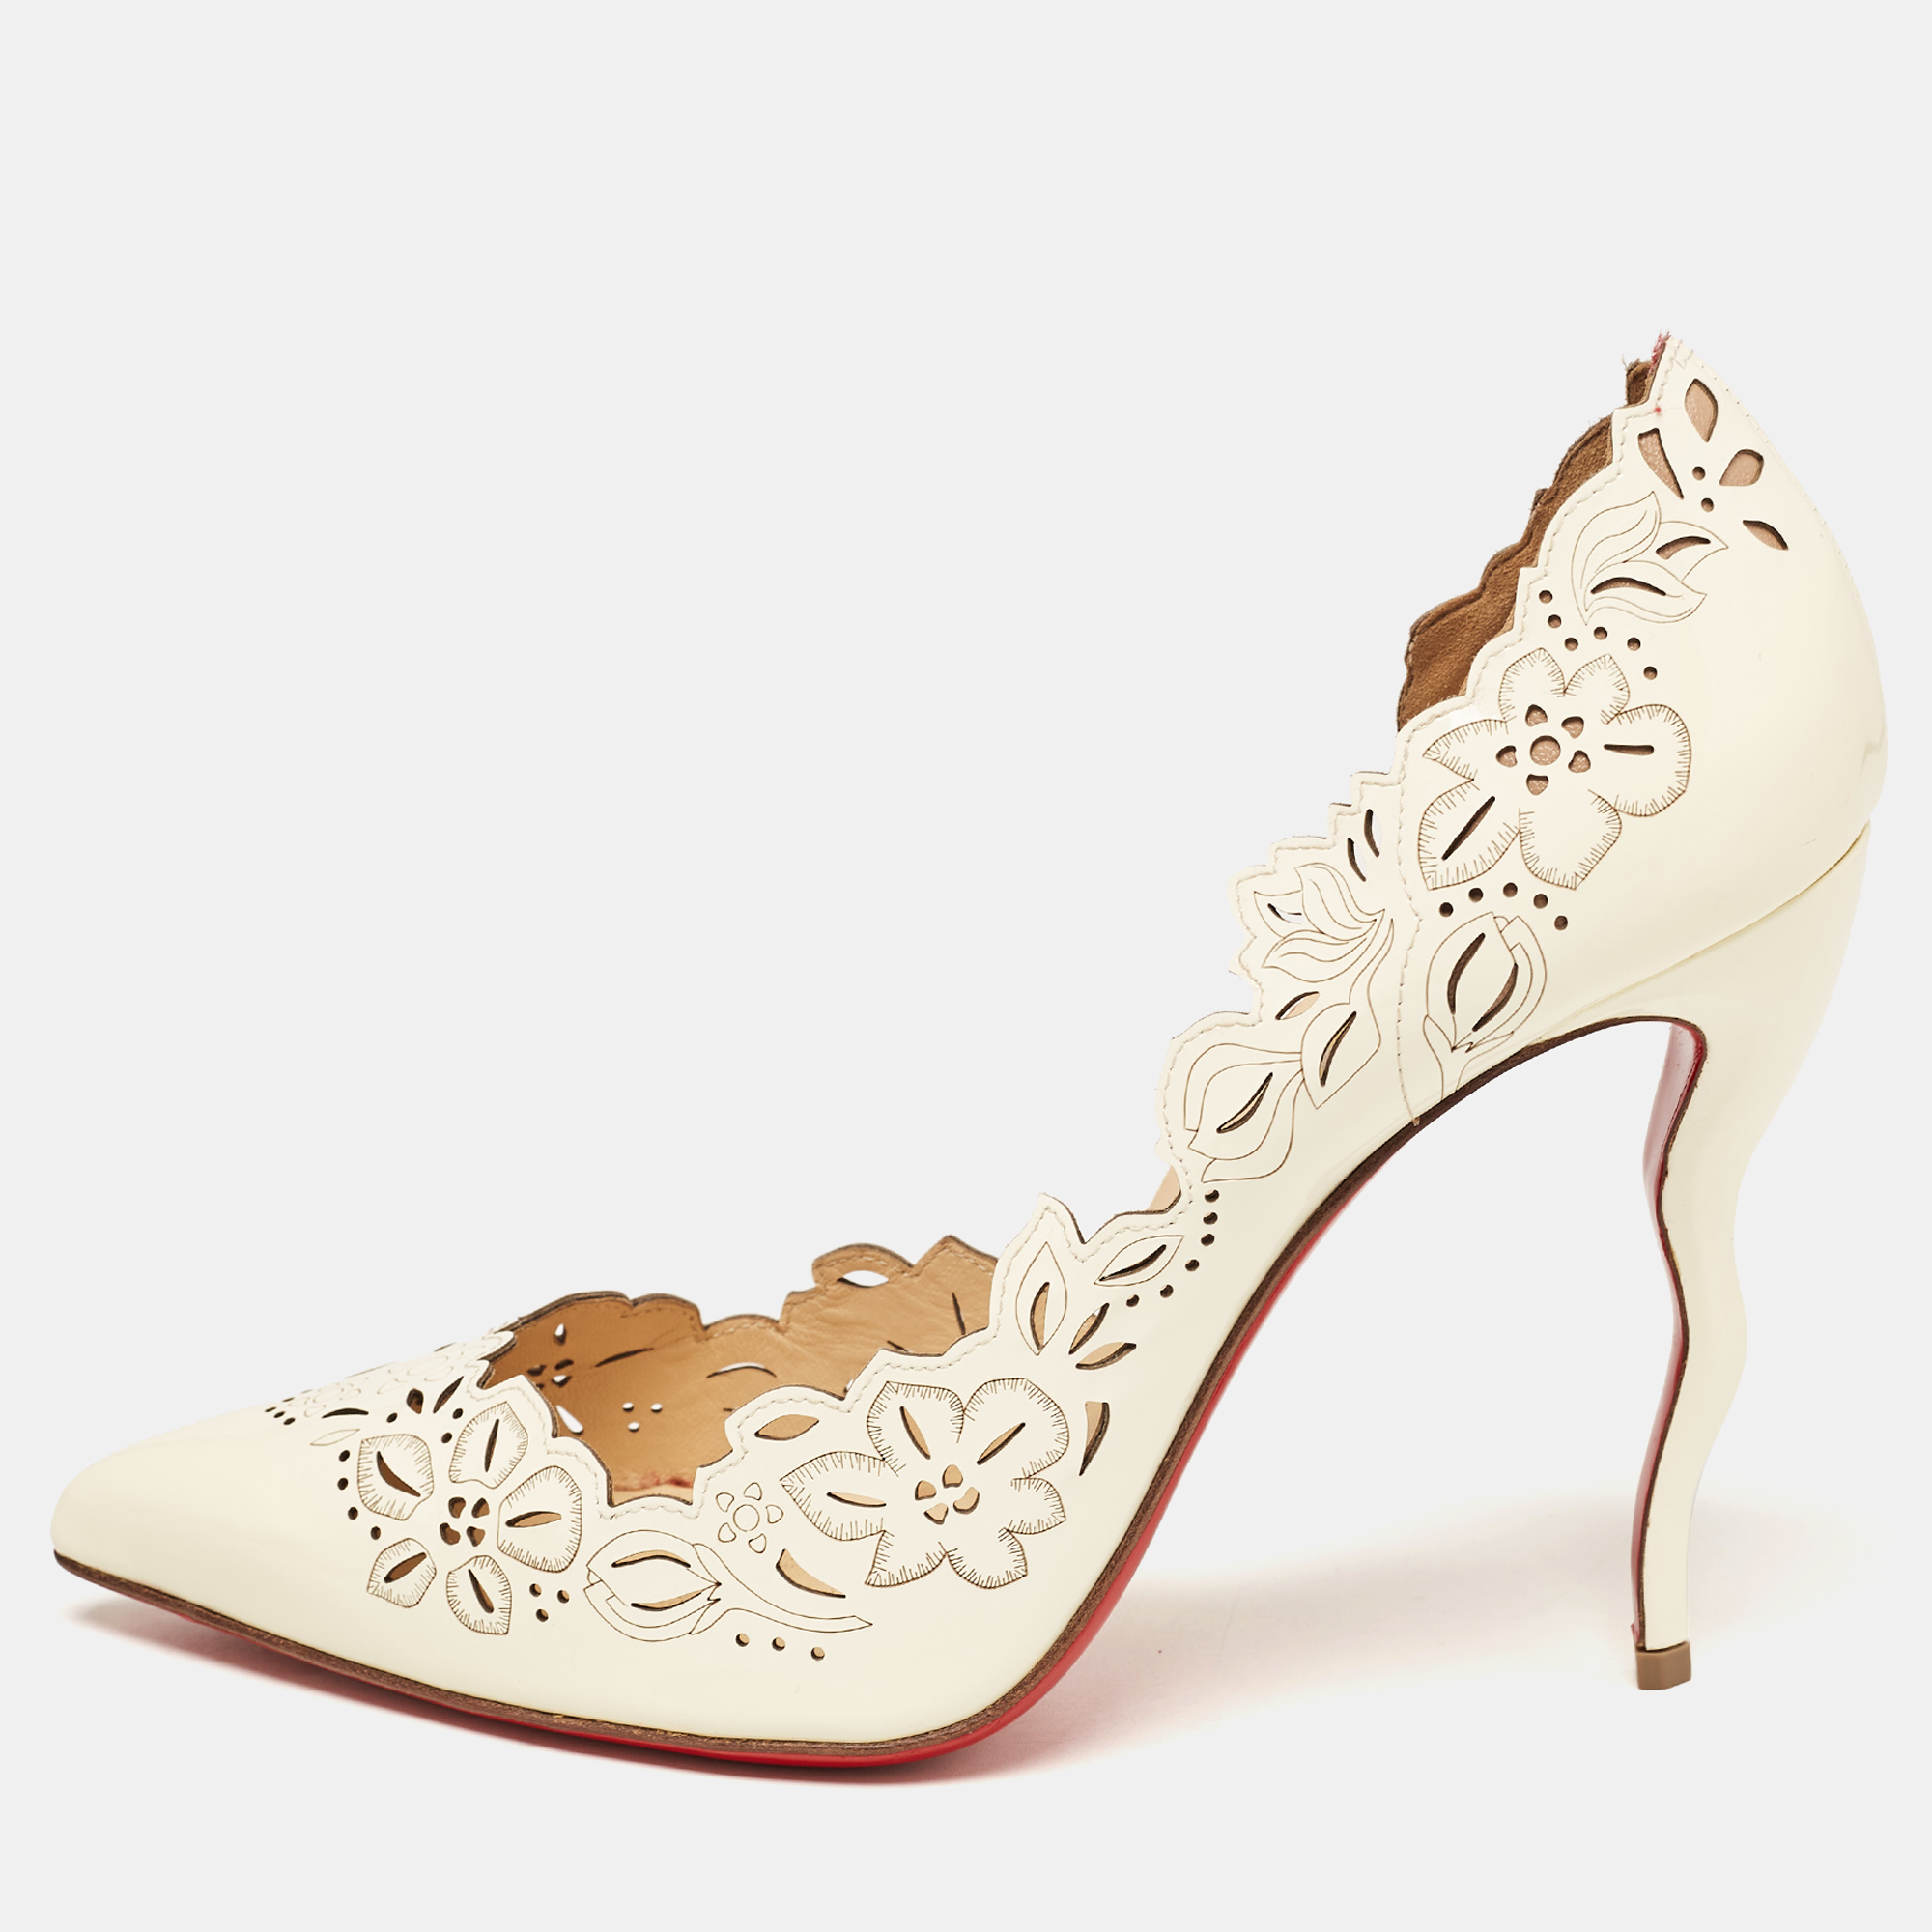 Pre-owned Christian Louboutin Off White Patent Leather Floral Laser Cut D'orsay Pumps Size 40